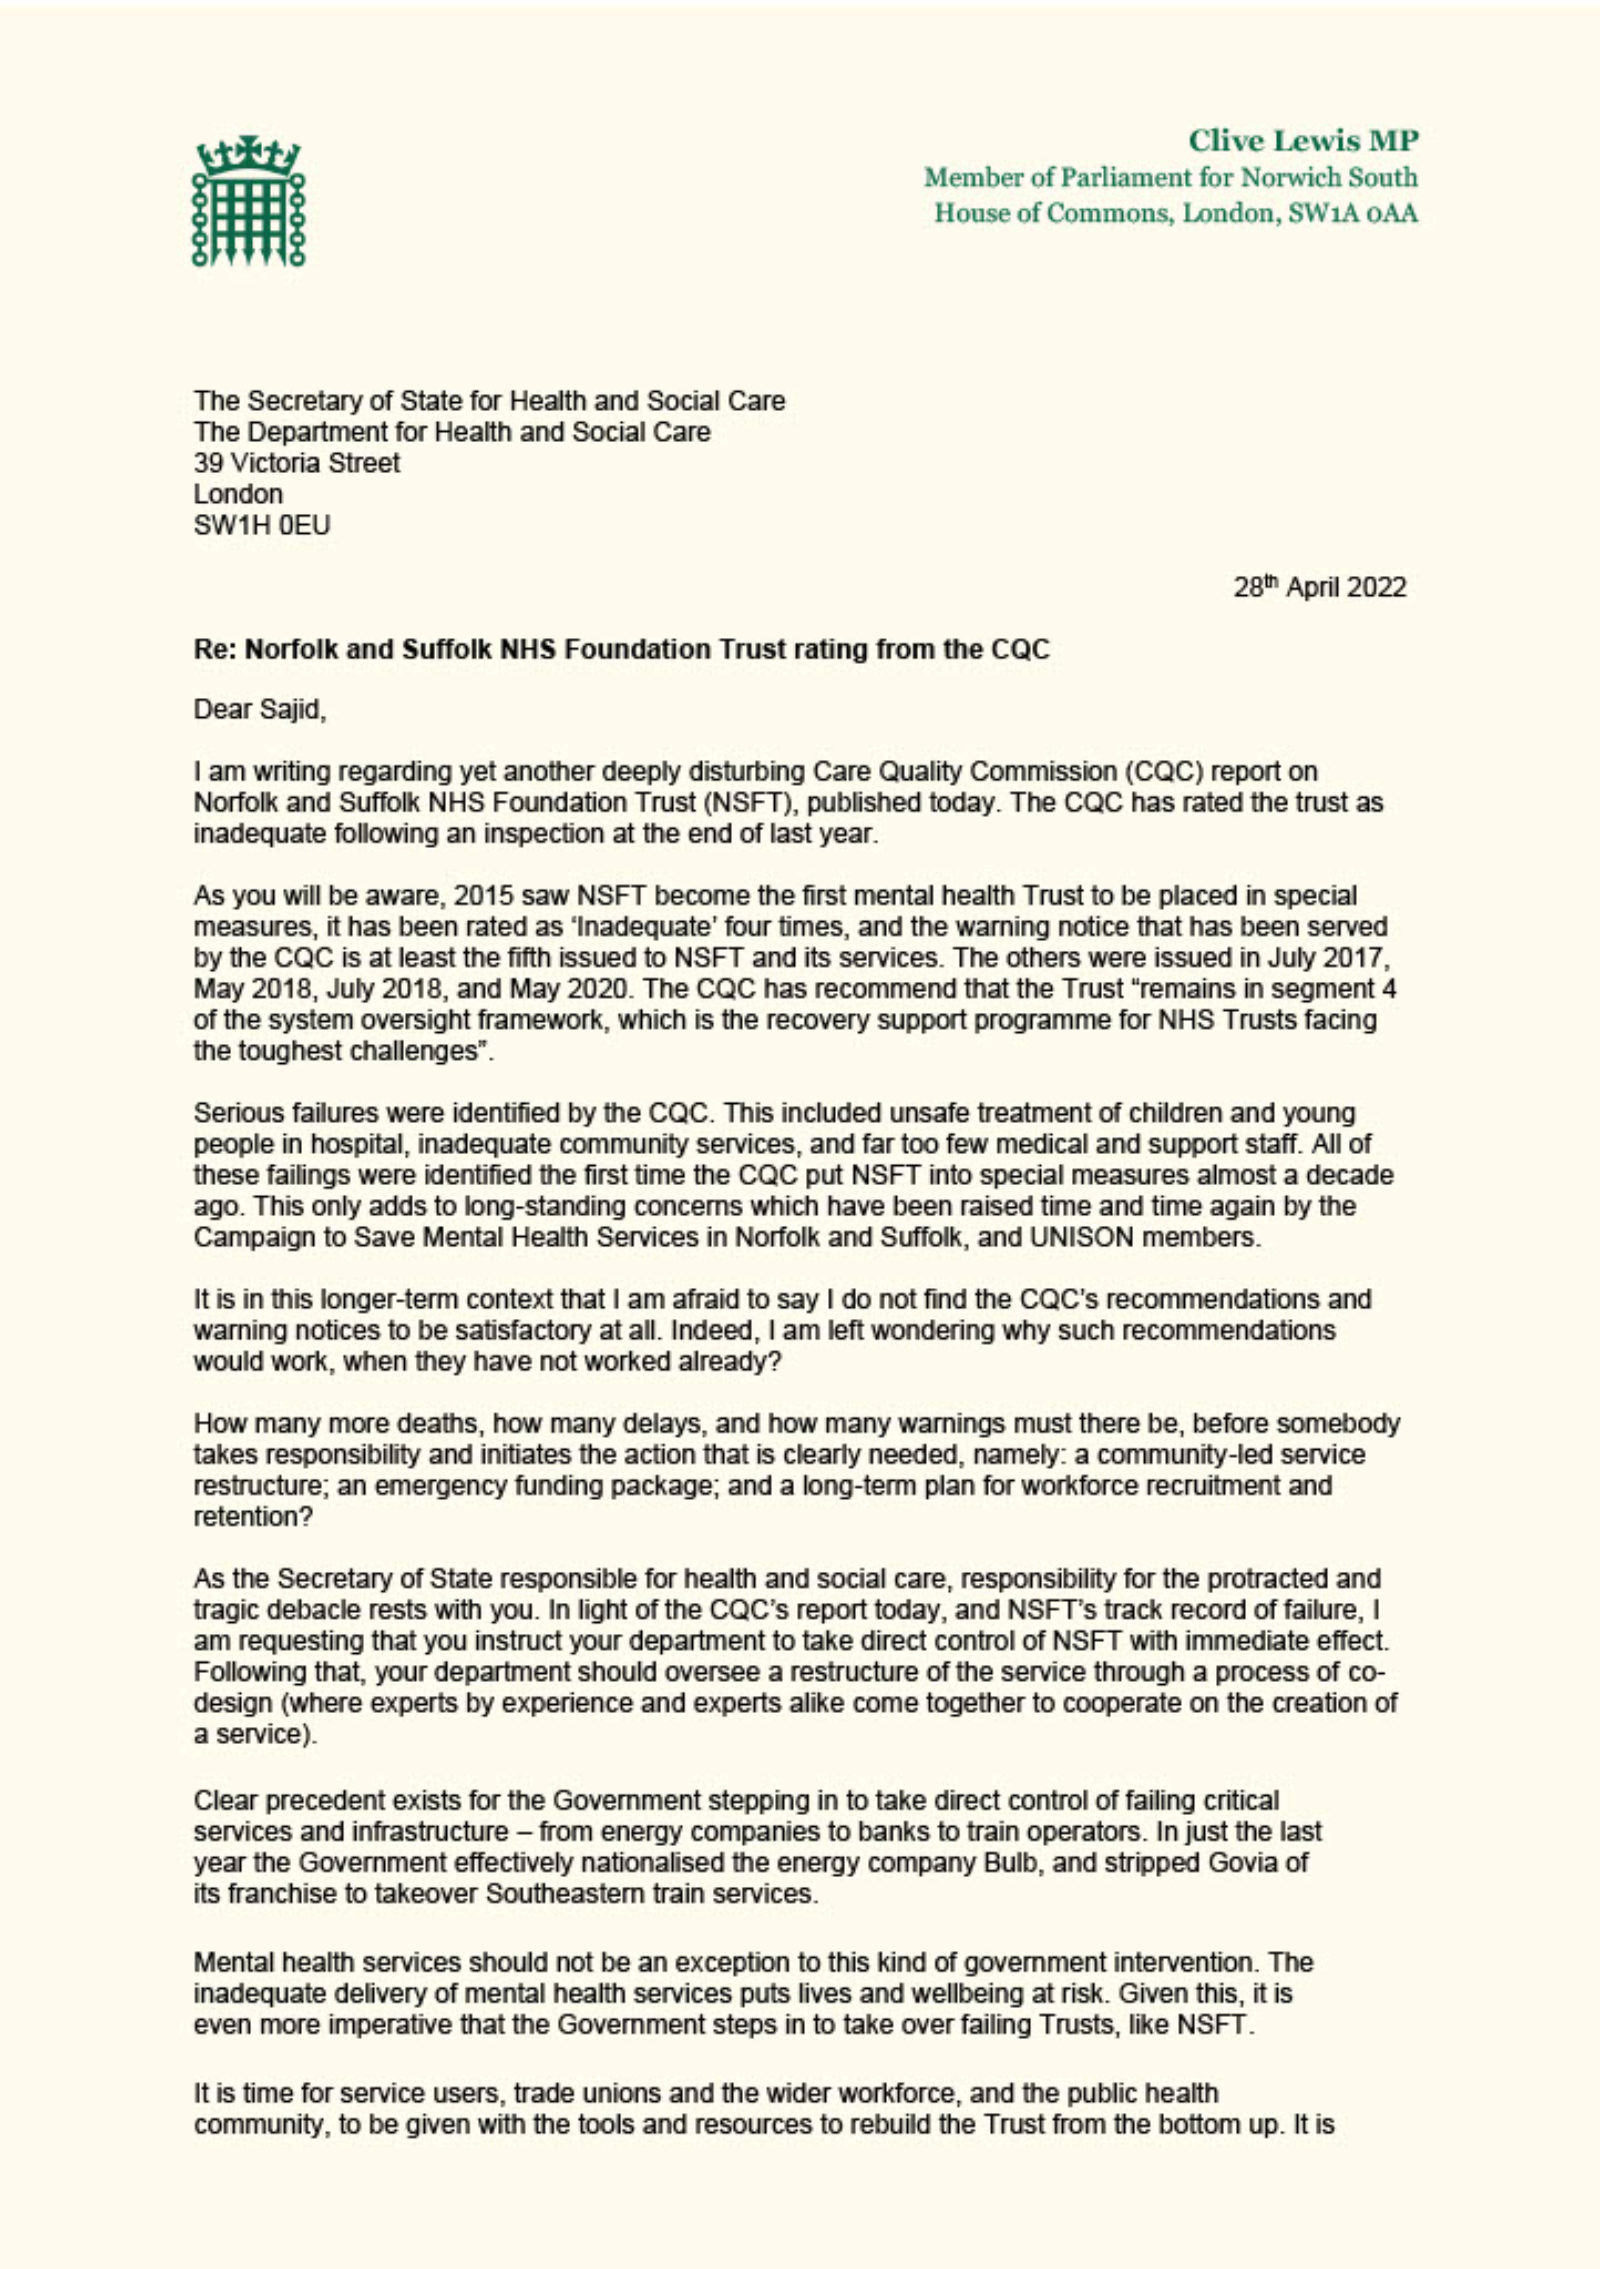 Letter to the Secretary of State for Health and Social Care re NSFT